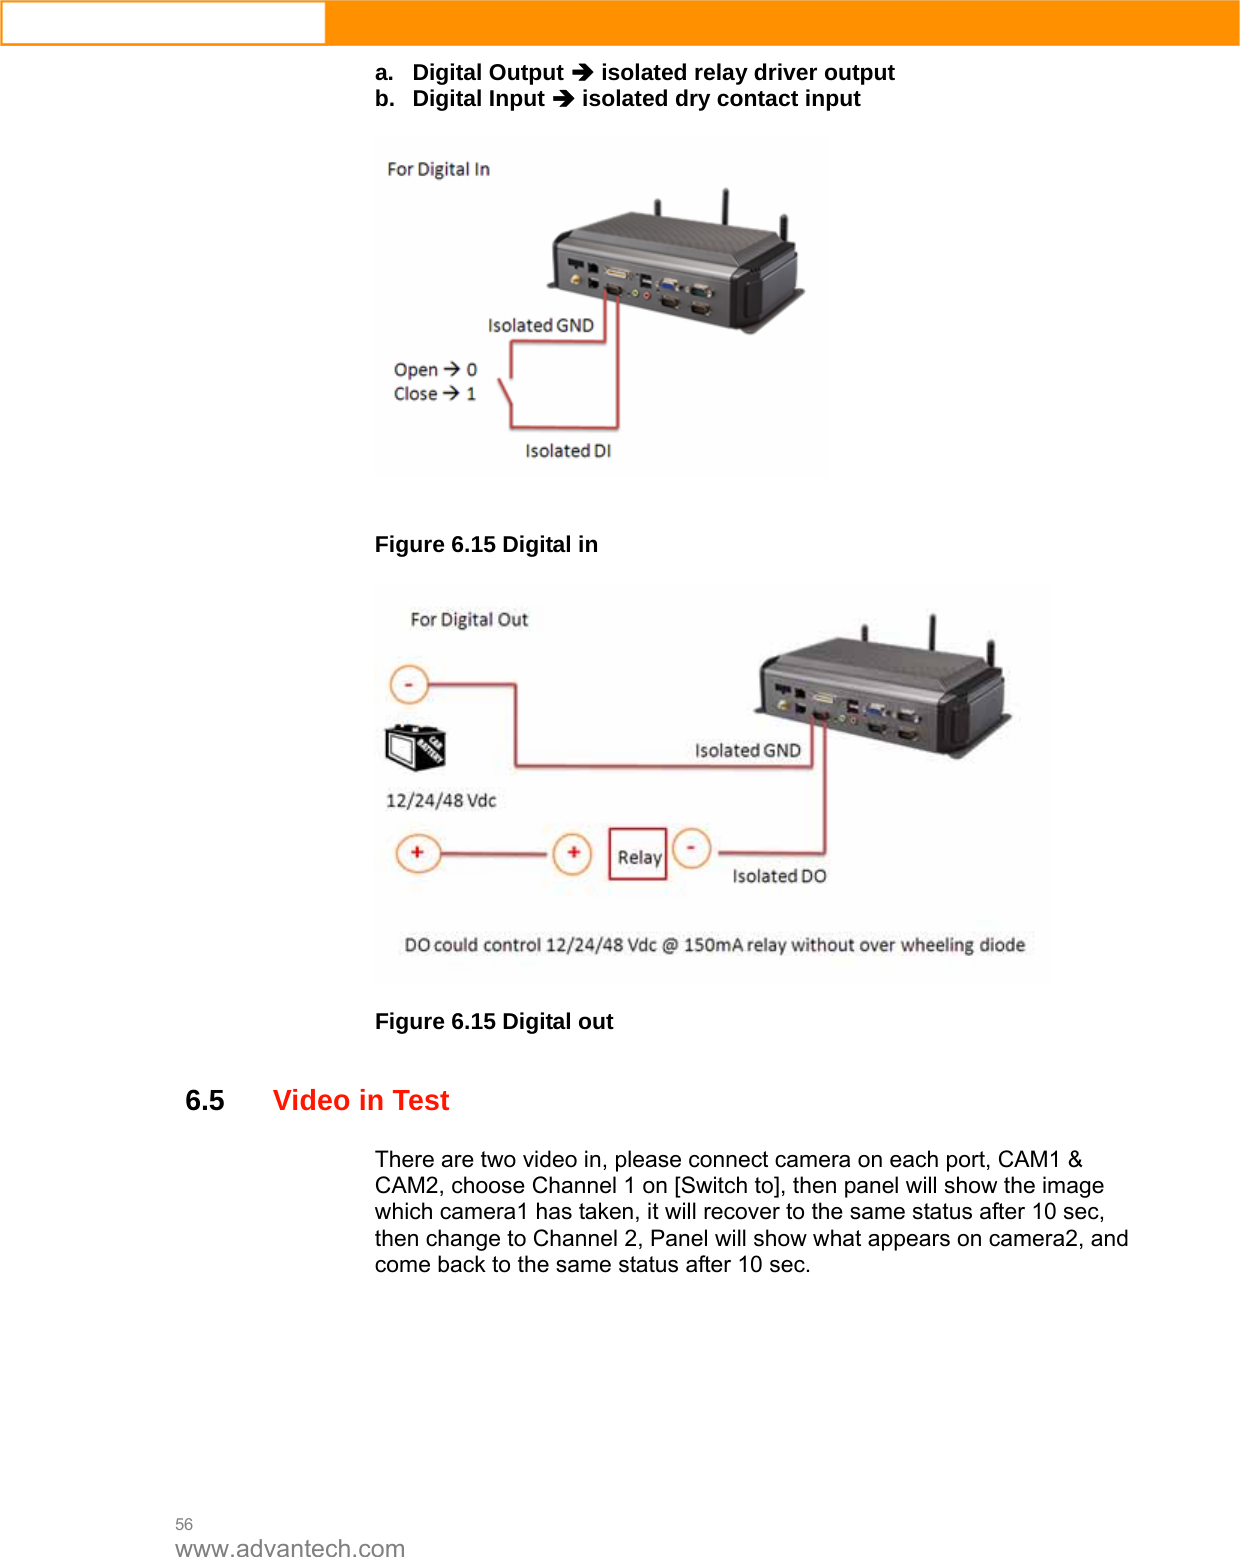  56 www.advantech.com a. Digital Output Î isolated relay driver output b. Digital Input Î isolated dry contact input     Figure 6.15 Digital in    Figure 6.15 Digital out   6.5Video in Test There are two video in, please connect camera on each port, CAM1 &amp; CAM2, choose Channel 1 on [Switch to], then panel will show the image which camera1 has taken, it will recover to the same status after 10 sec, then change to Channel 2, Panel will show what appears on camera2, and come back to the same status after 10 sec.    